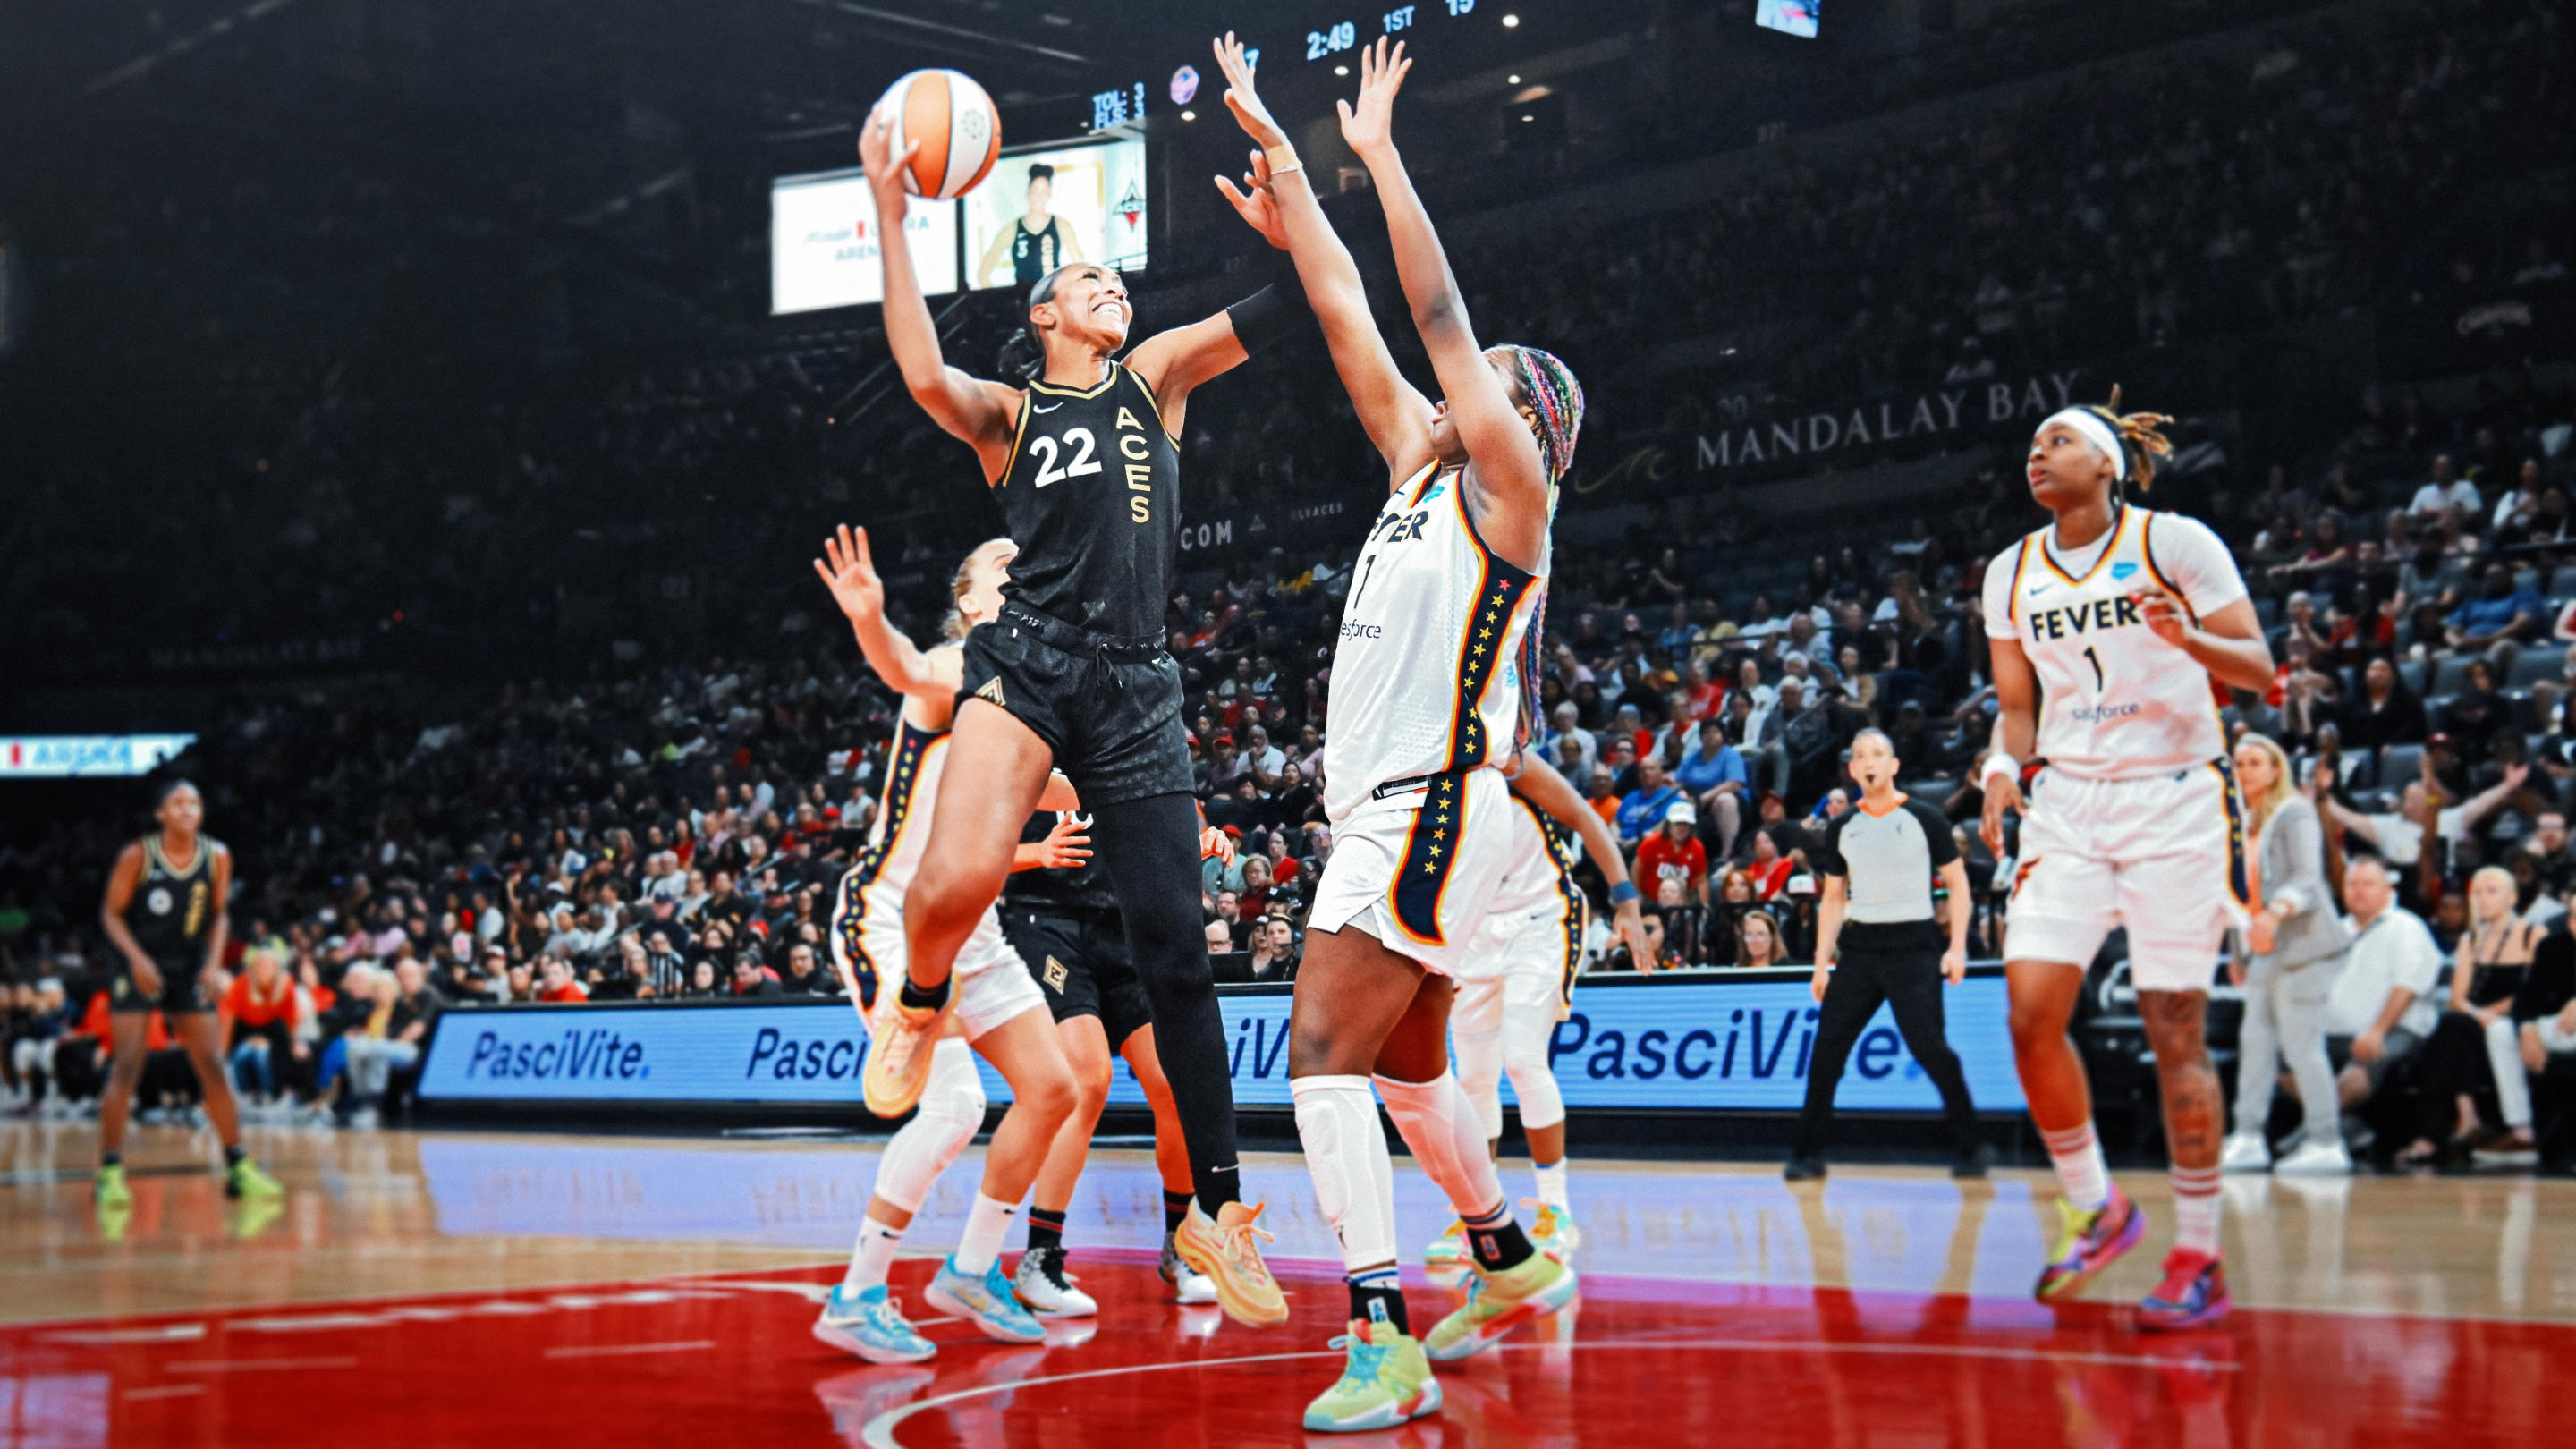 The Las Vegas Aces, led by A'ja Wilson, built a super-team through the draft, much like the Indiana Fever hope to do. (Photo by Ethan Miller/Getty Images)